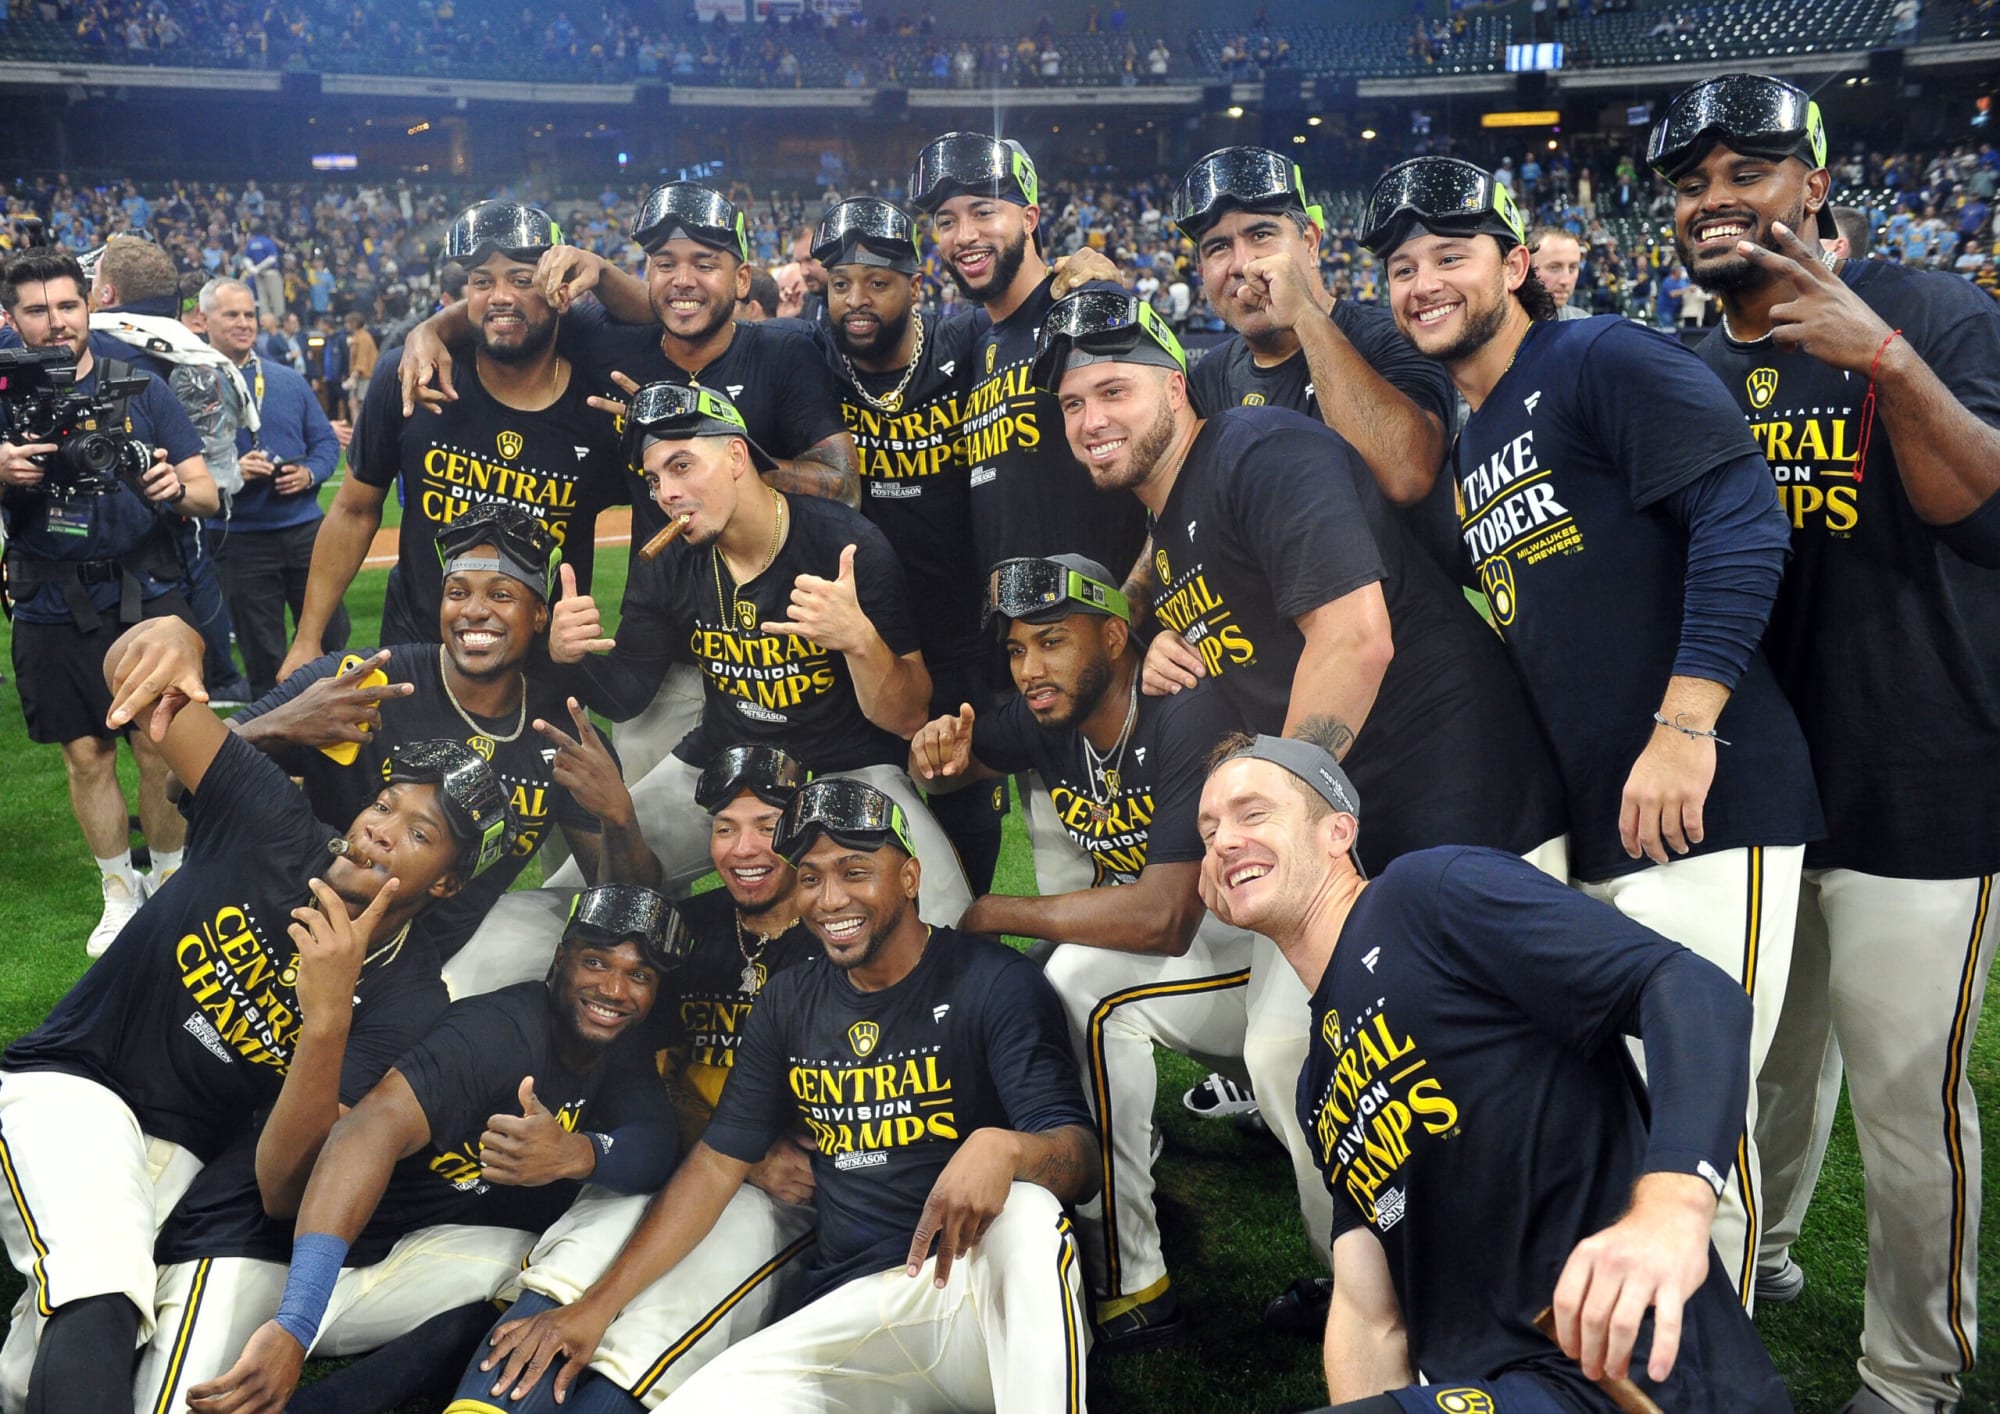 4 reasons to like Milwaukee Brewers chances to win the World Series